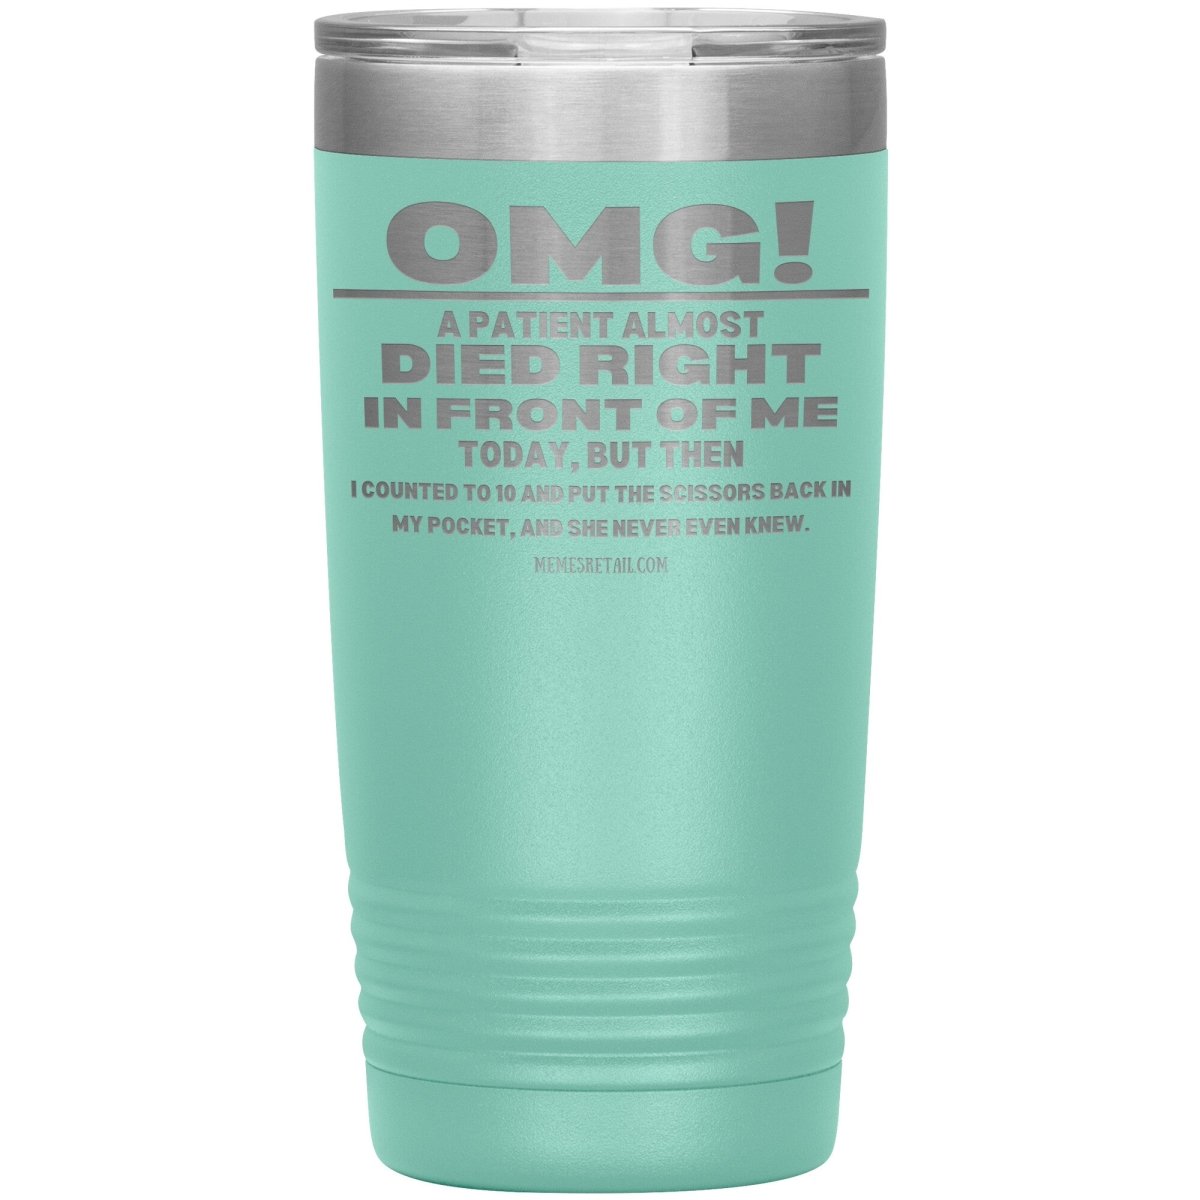 OMG! A Patient Almost Died Today Tumblers, 20oz Insulated Tumbler / Teal - MemesRetail.com